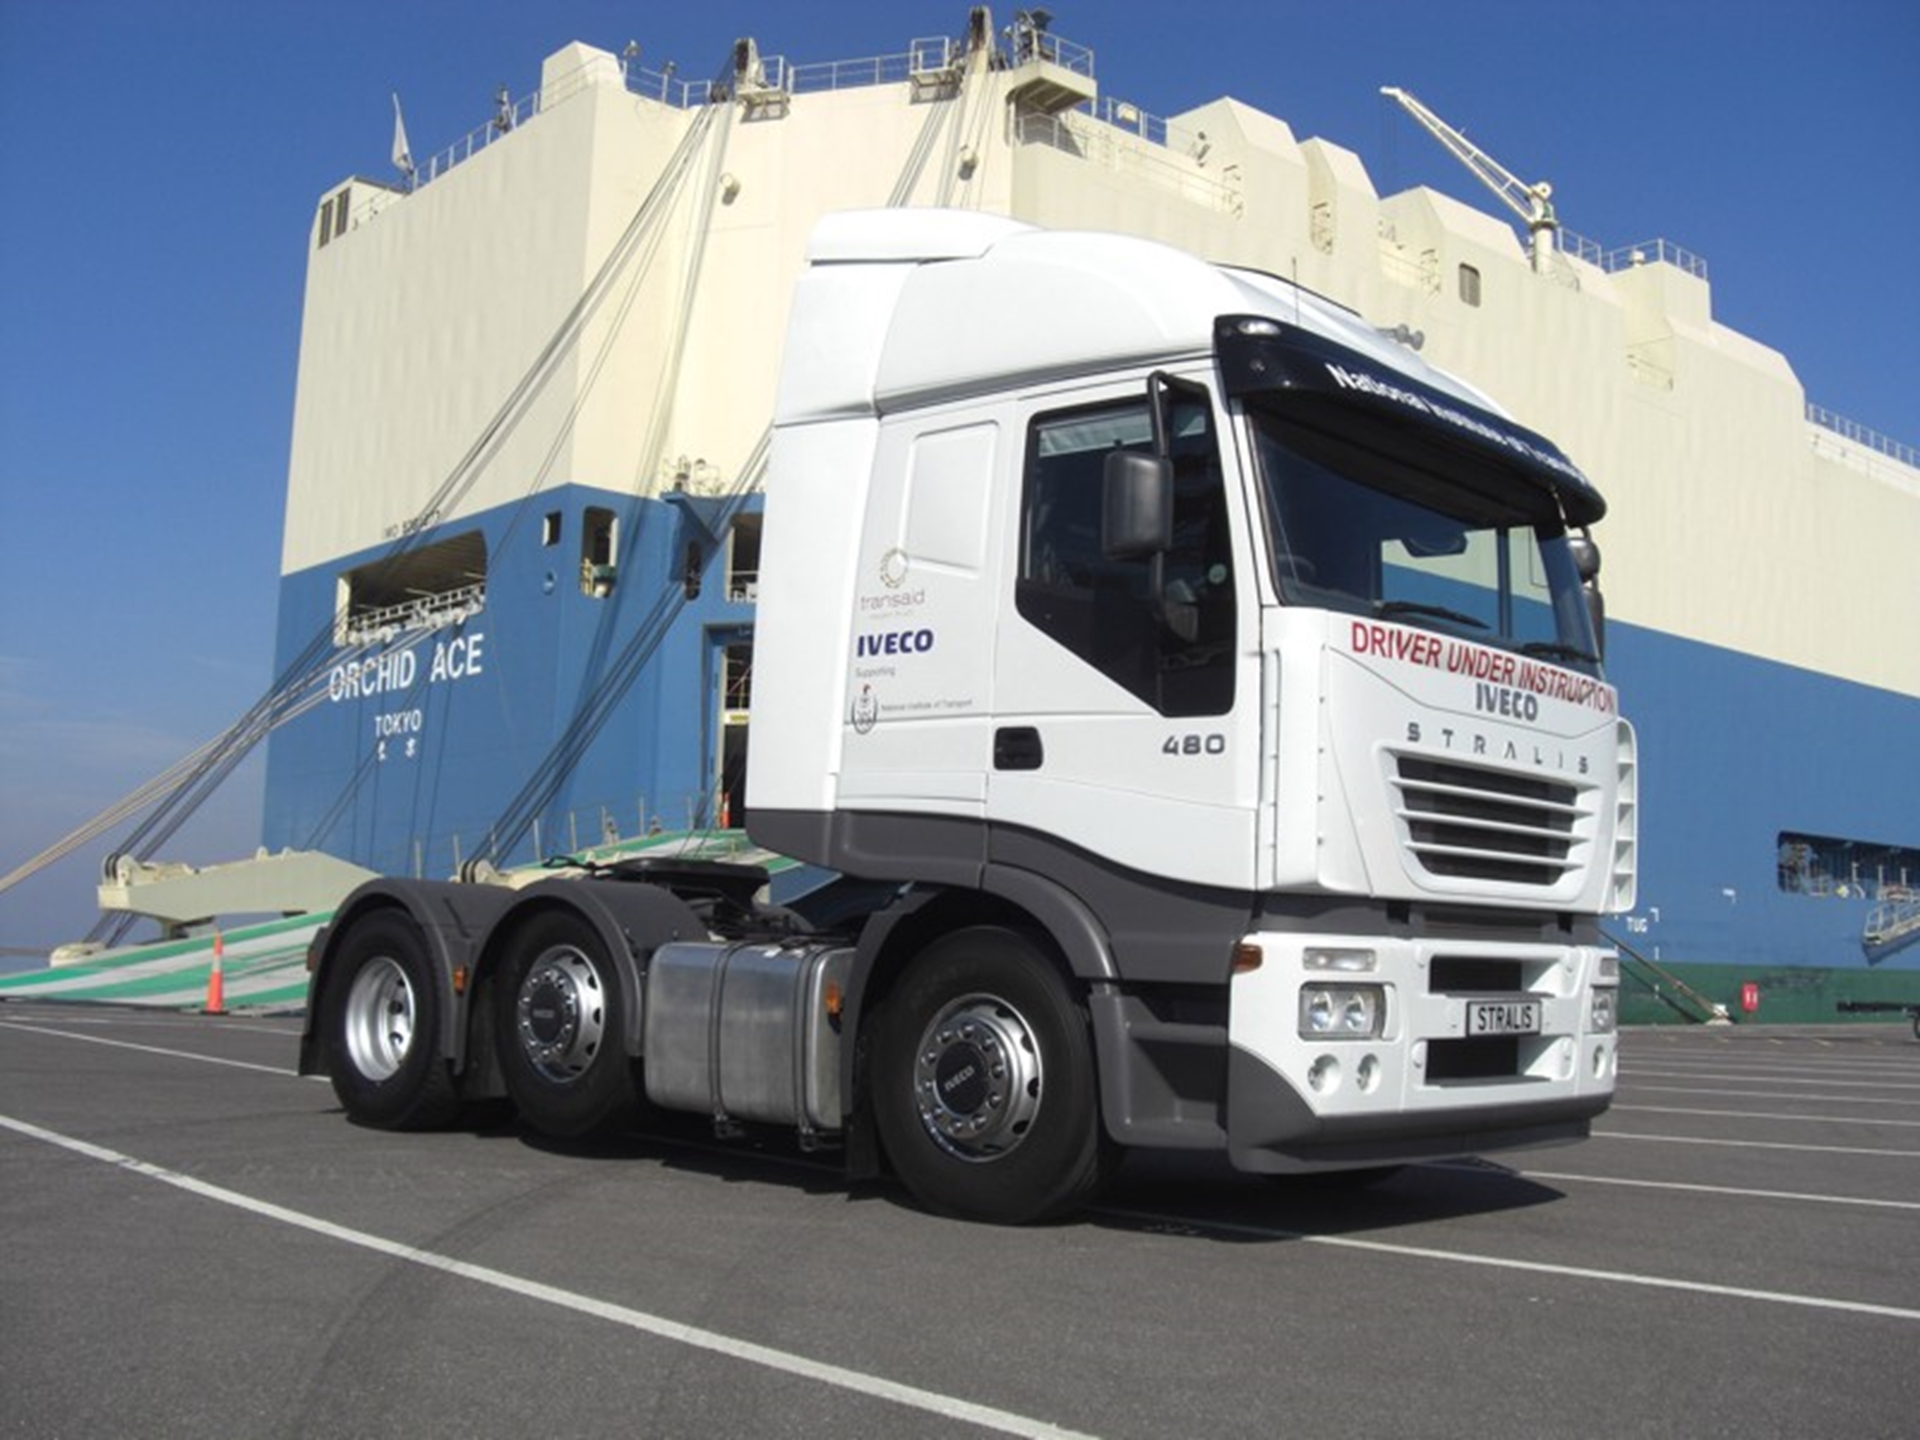 IVECO STRALIS LEAVES UK SHORES FOR DRIVER TRAINING ROLE IN TANZANIA